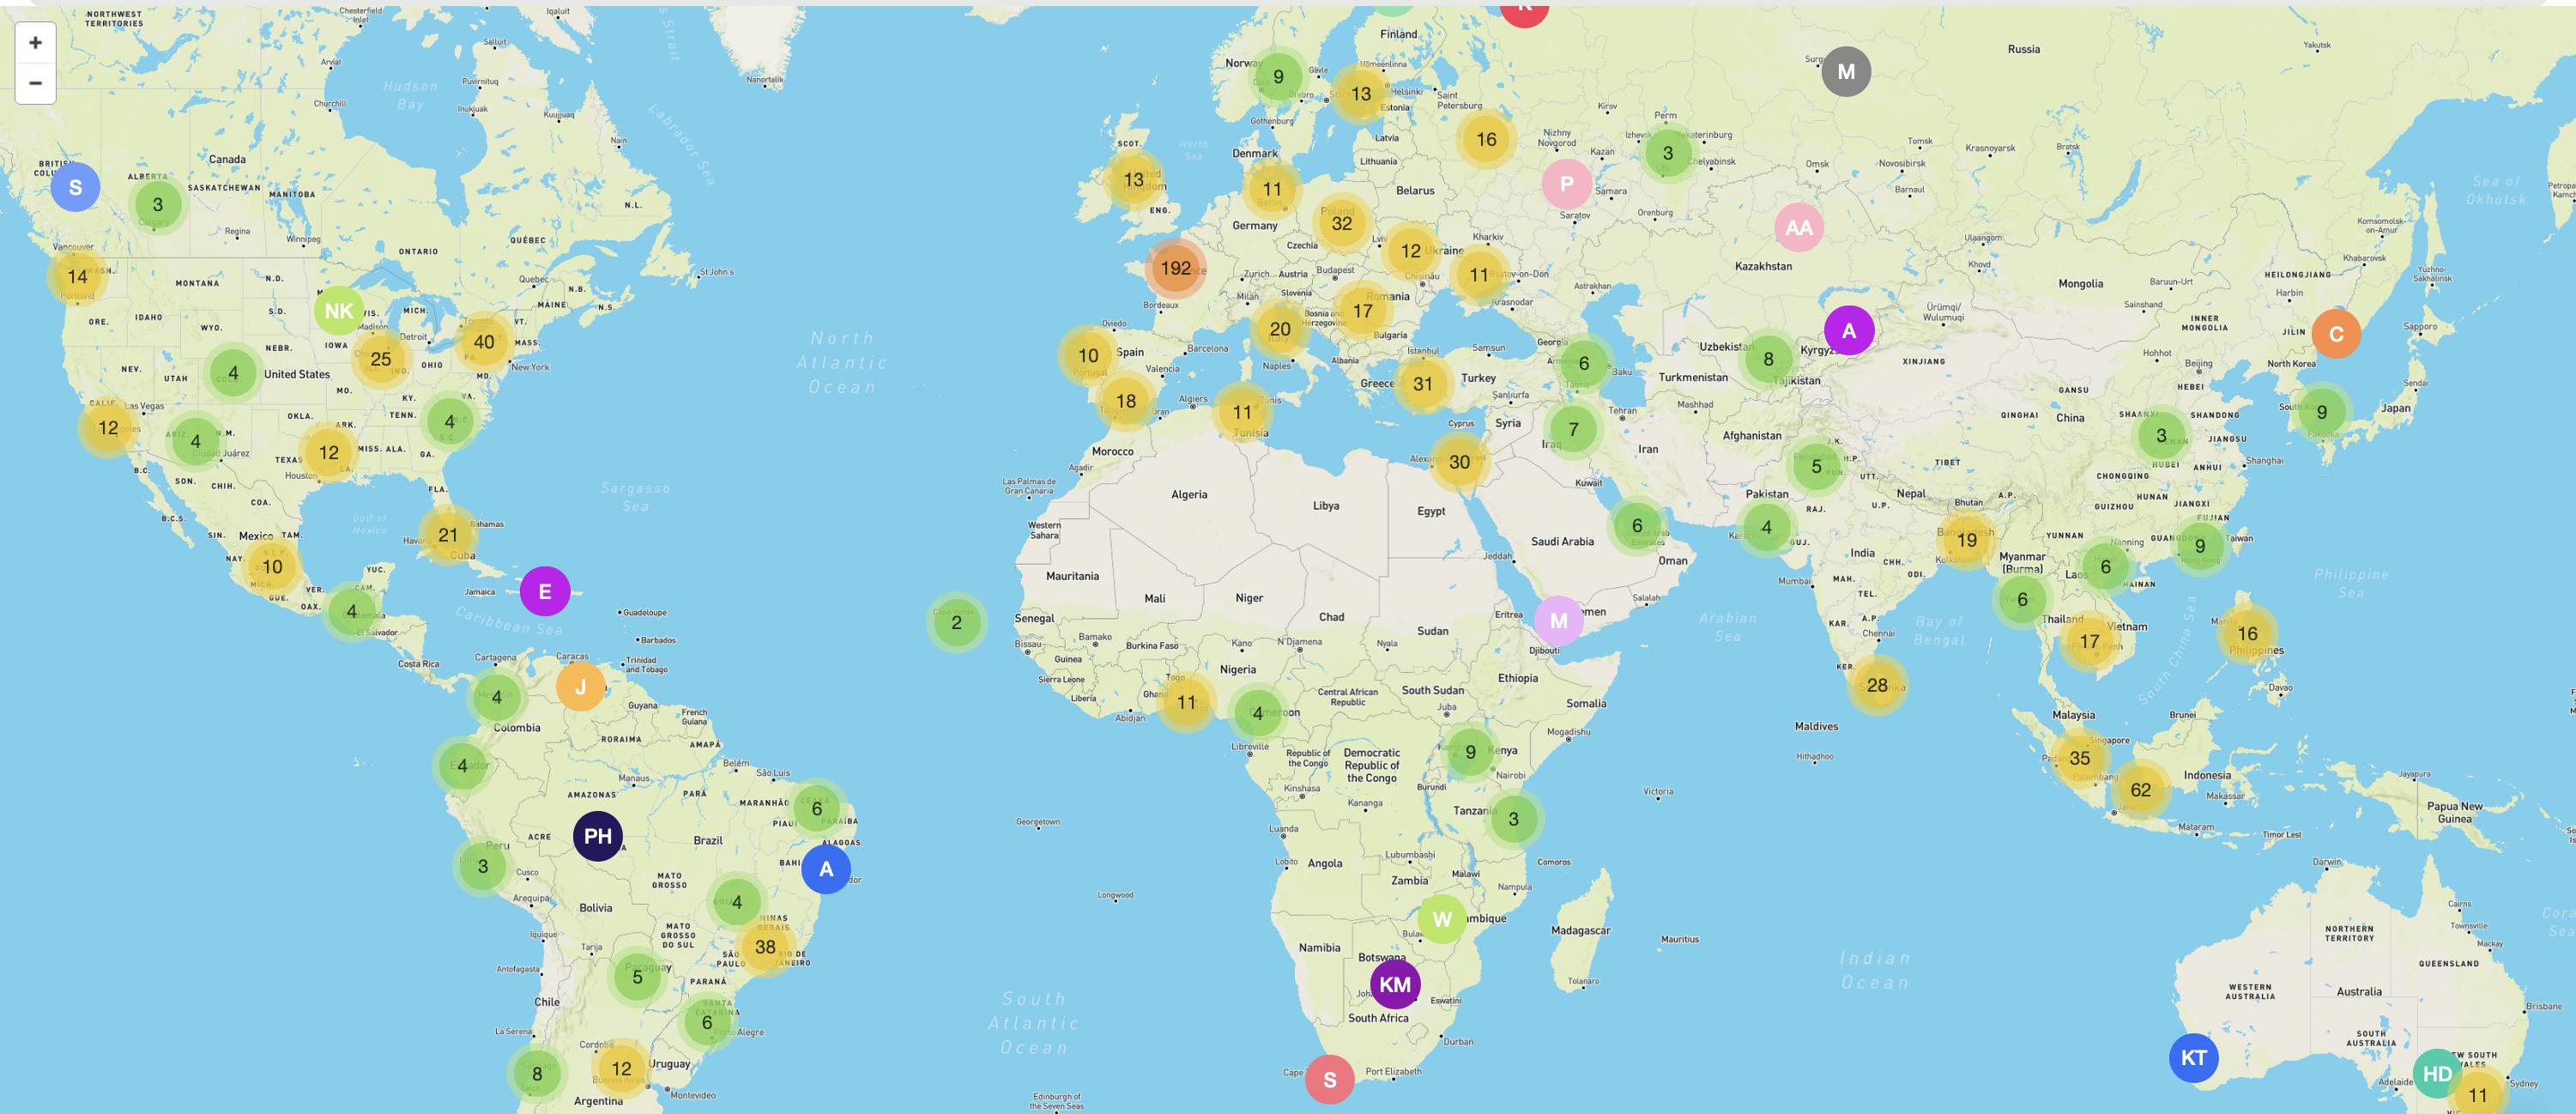 15237 developers from more than 100 countries use Qovery at the end of 2021 - (Unfortunately, we can't see all of them on the map)